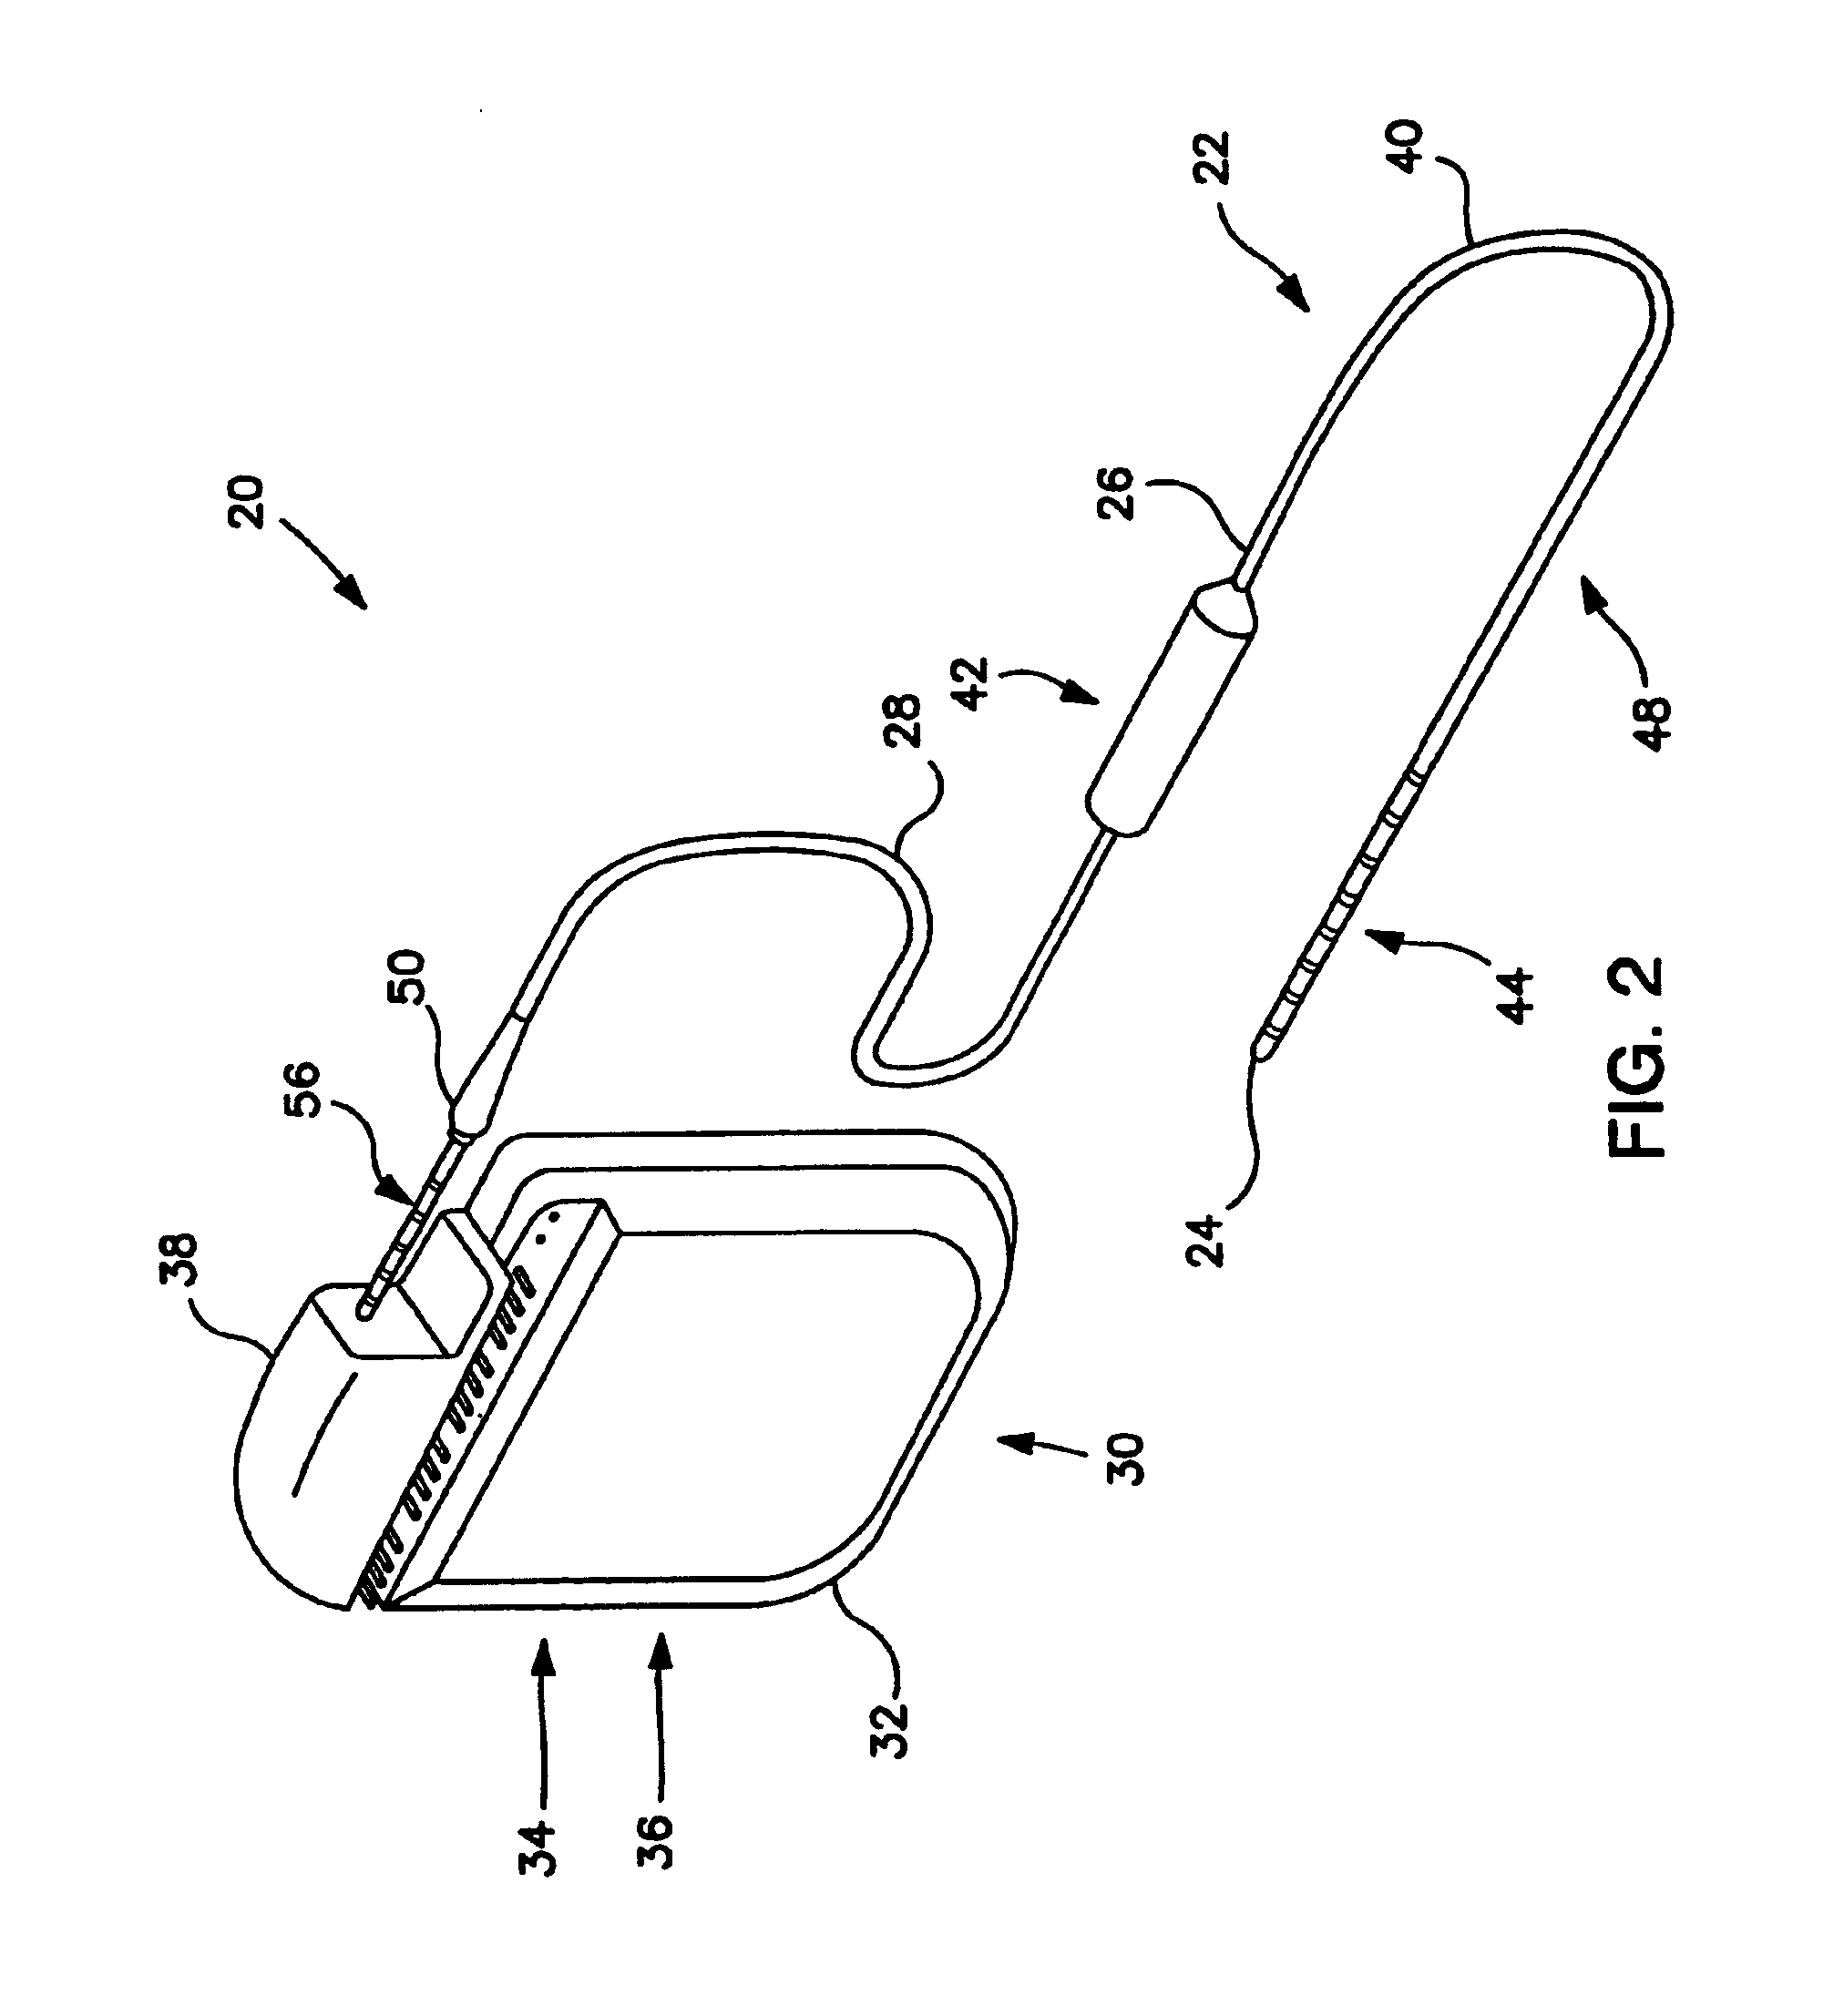 Low impedance implantable extension for a neurological electrical stimulator